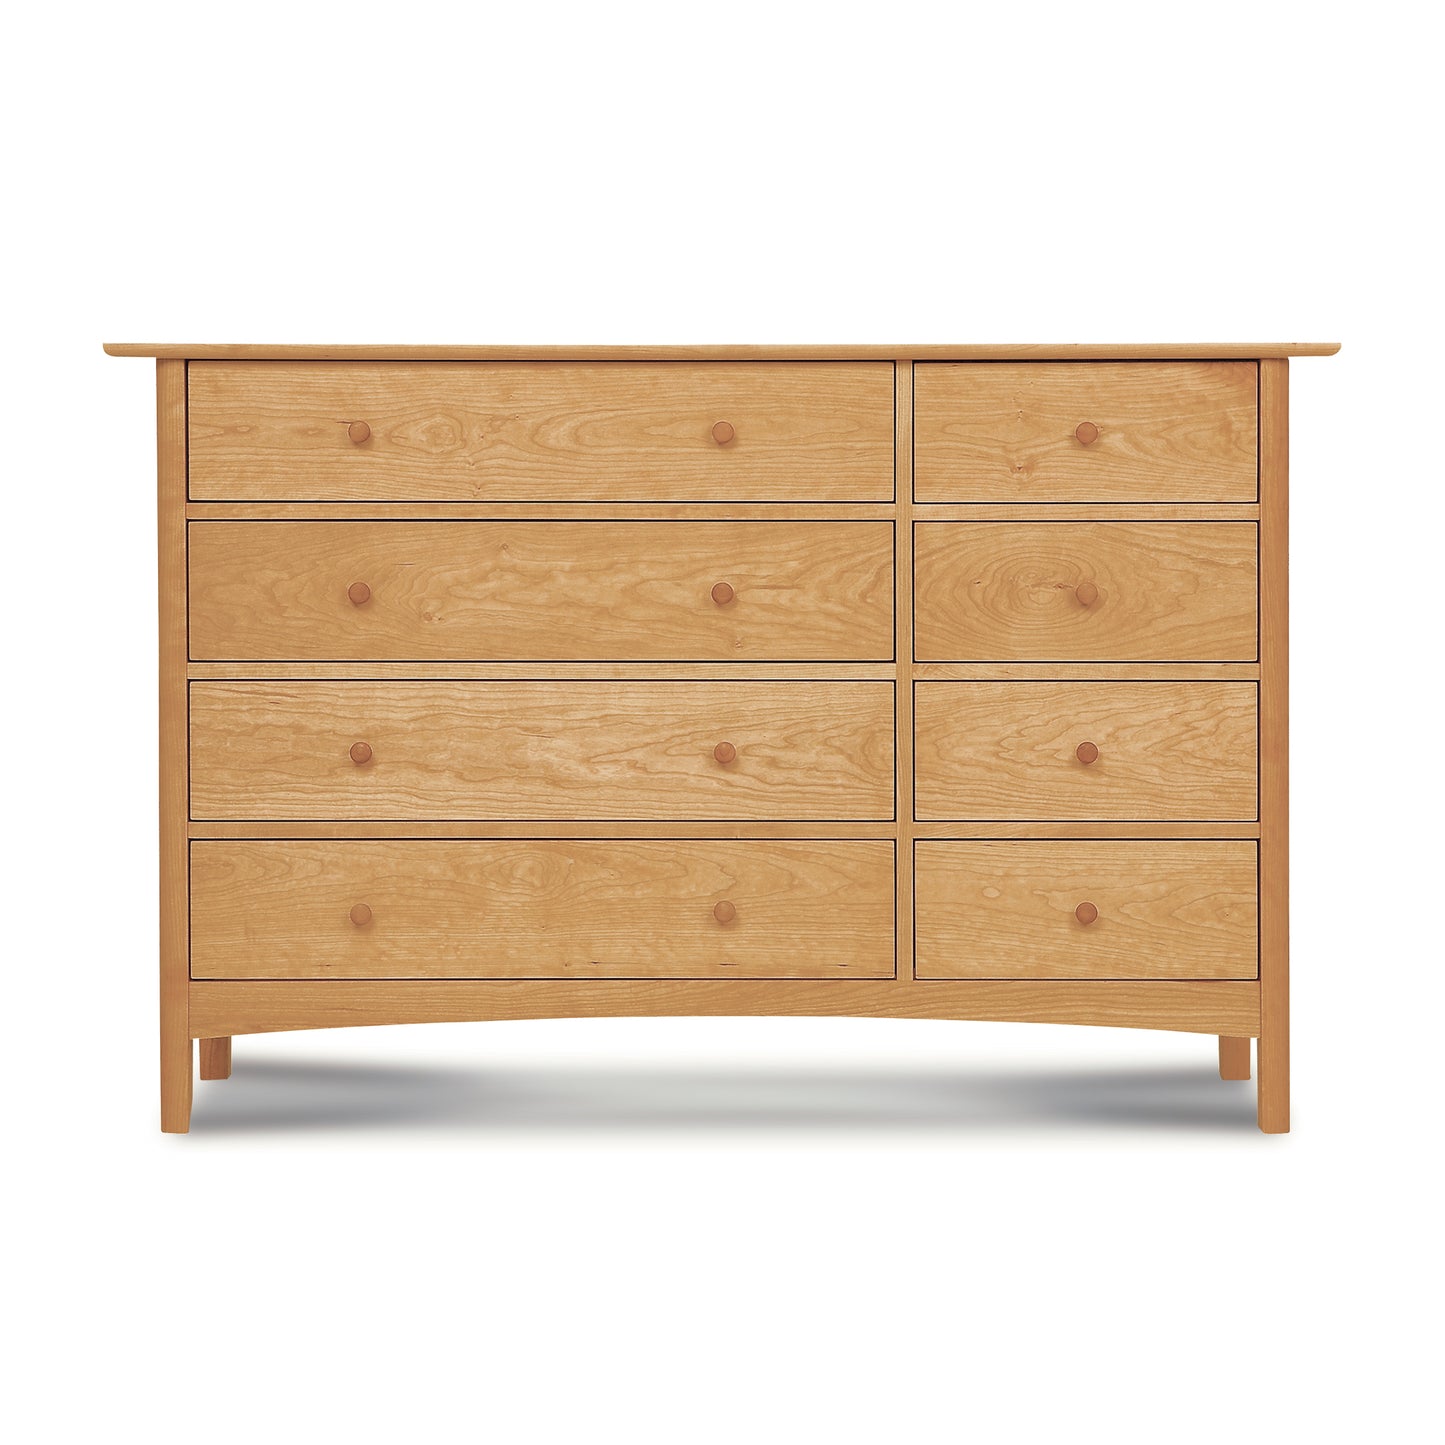 Solid hardwood Heartwood Shaker 8-Drawer Dresser #2 by Vermont Furniture Designs, isolated on a white background.